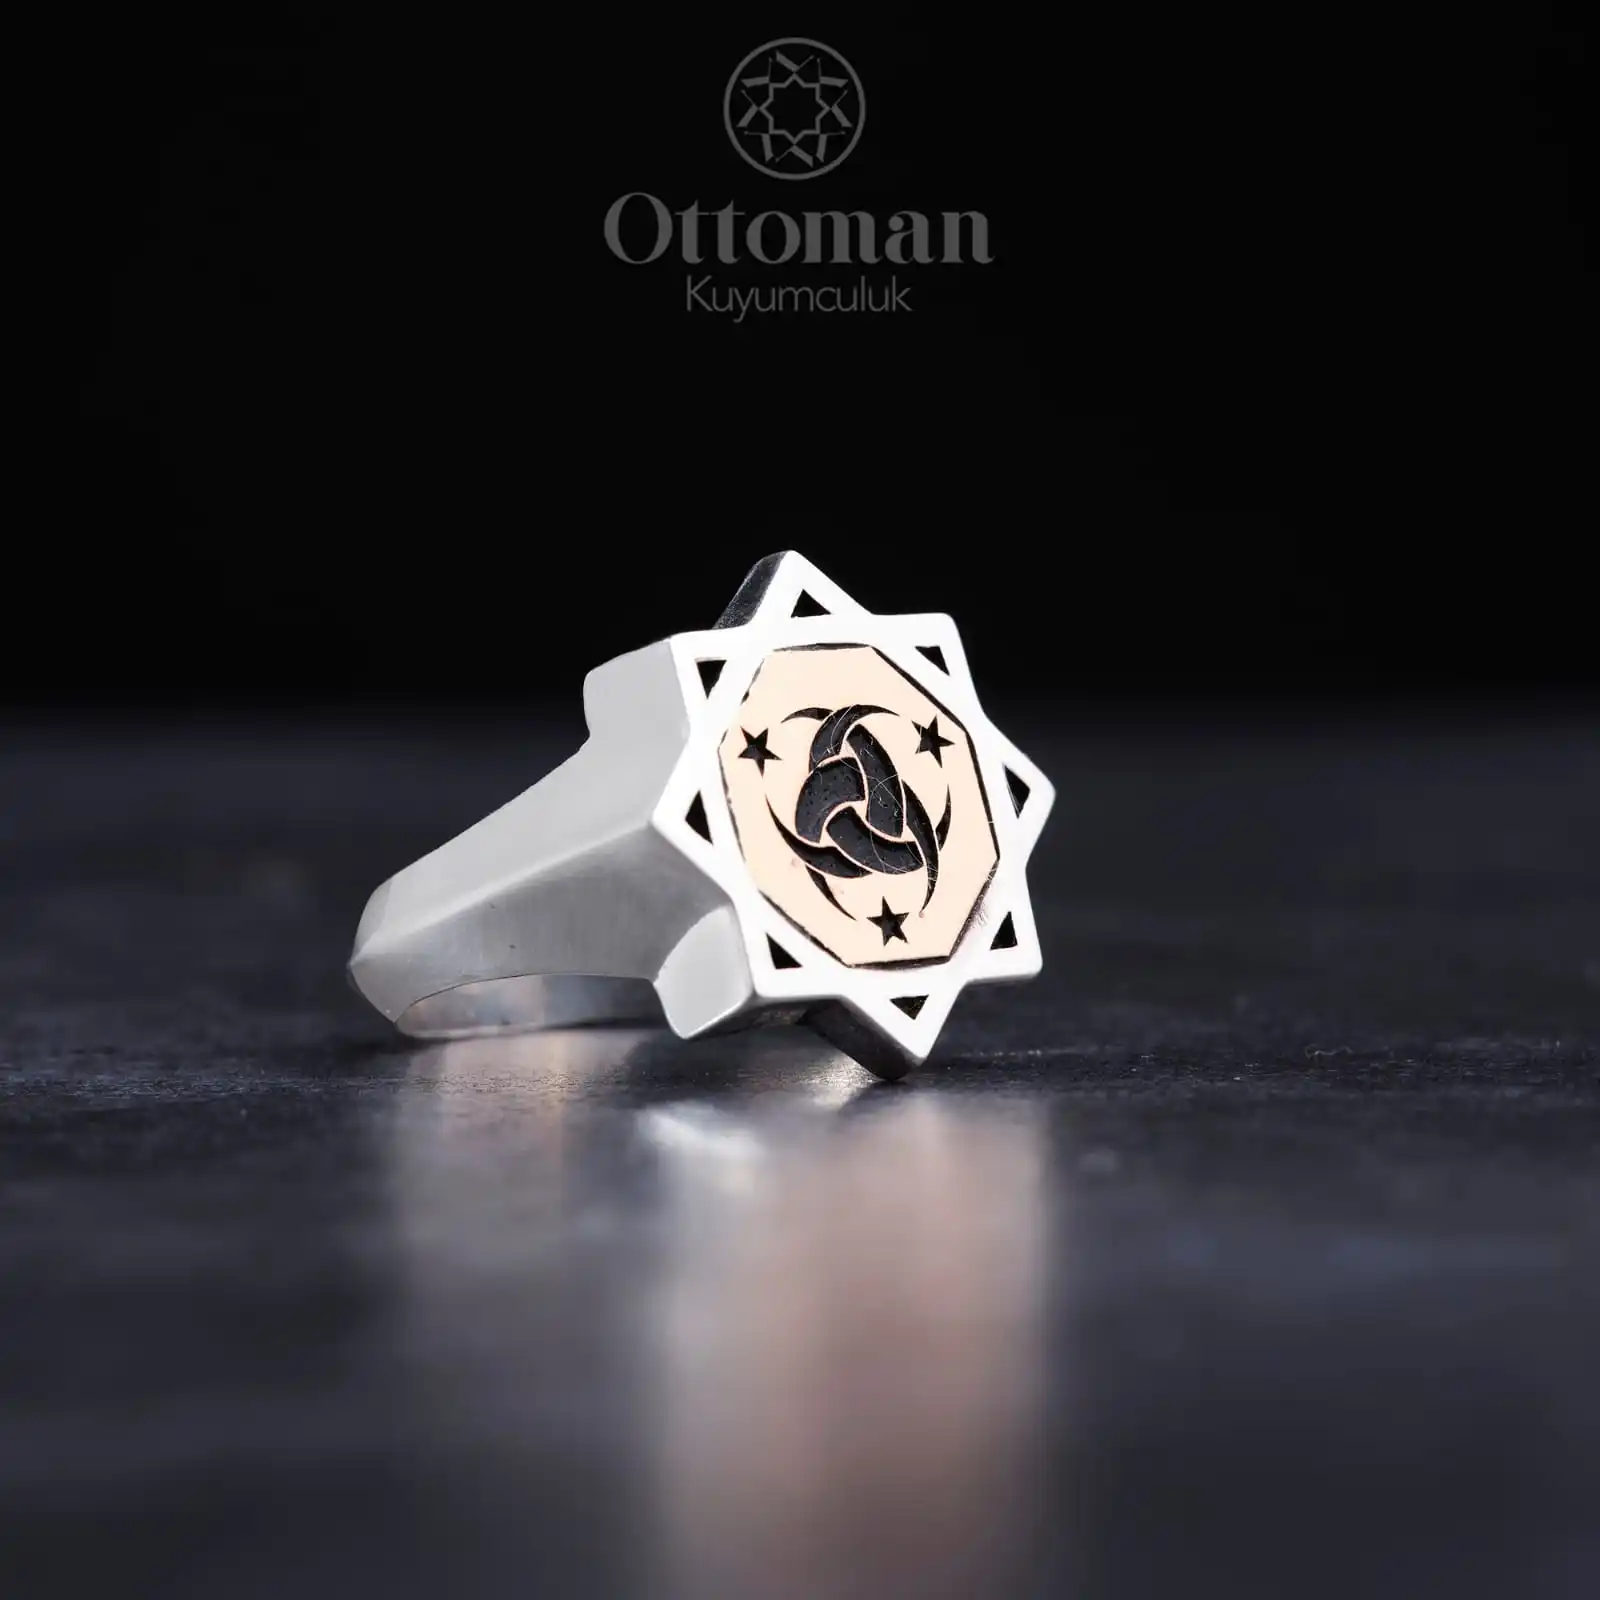 The Seljuk Star has a 925k Silver Ring, An Organization-Specific Symbol has been processed in the middle of the Ring, Handmade